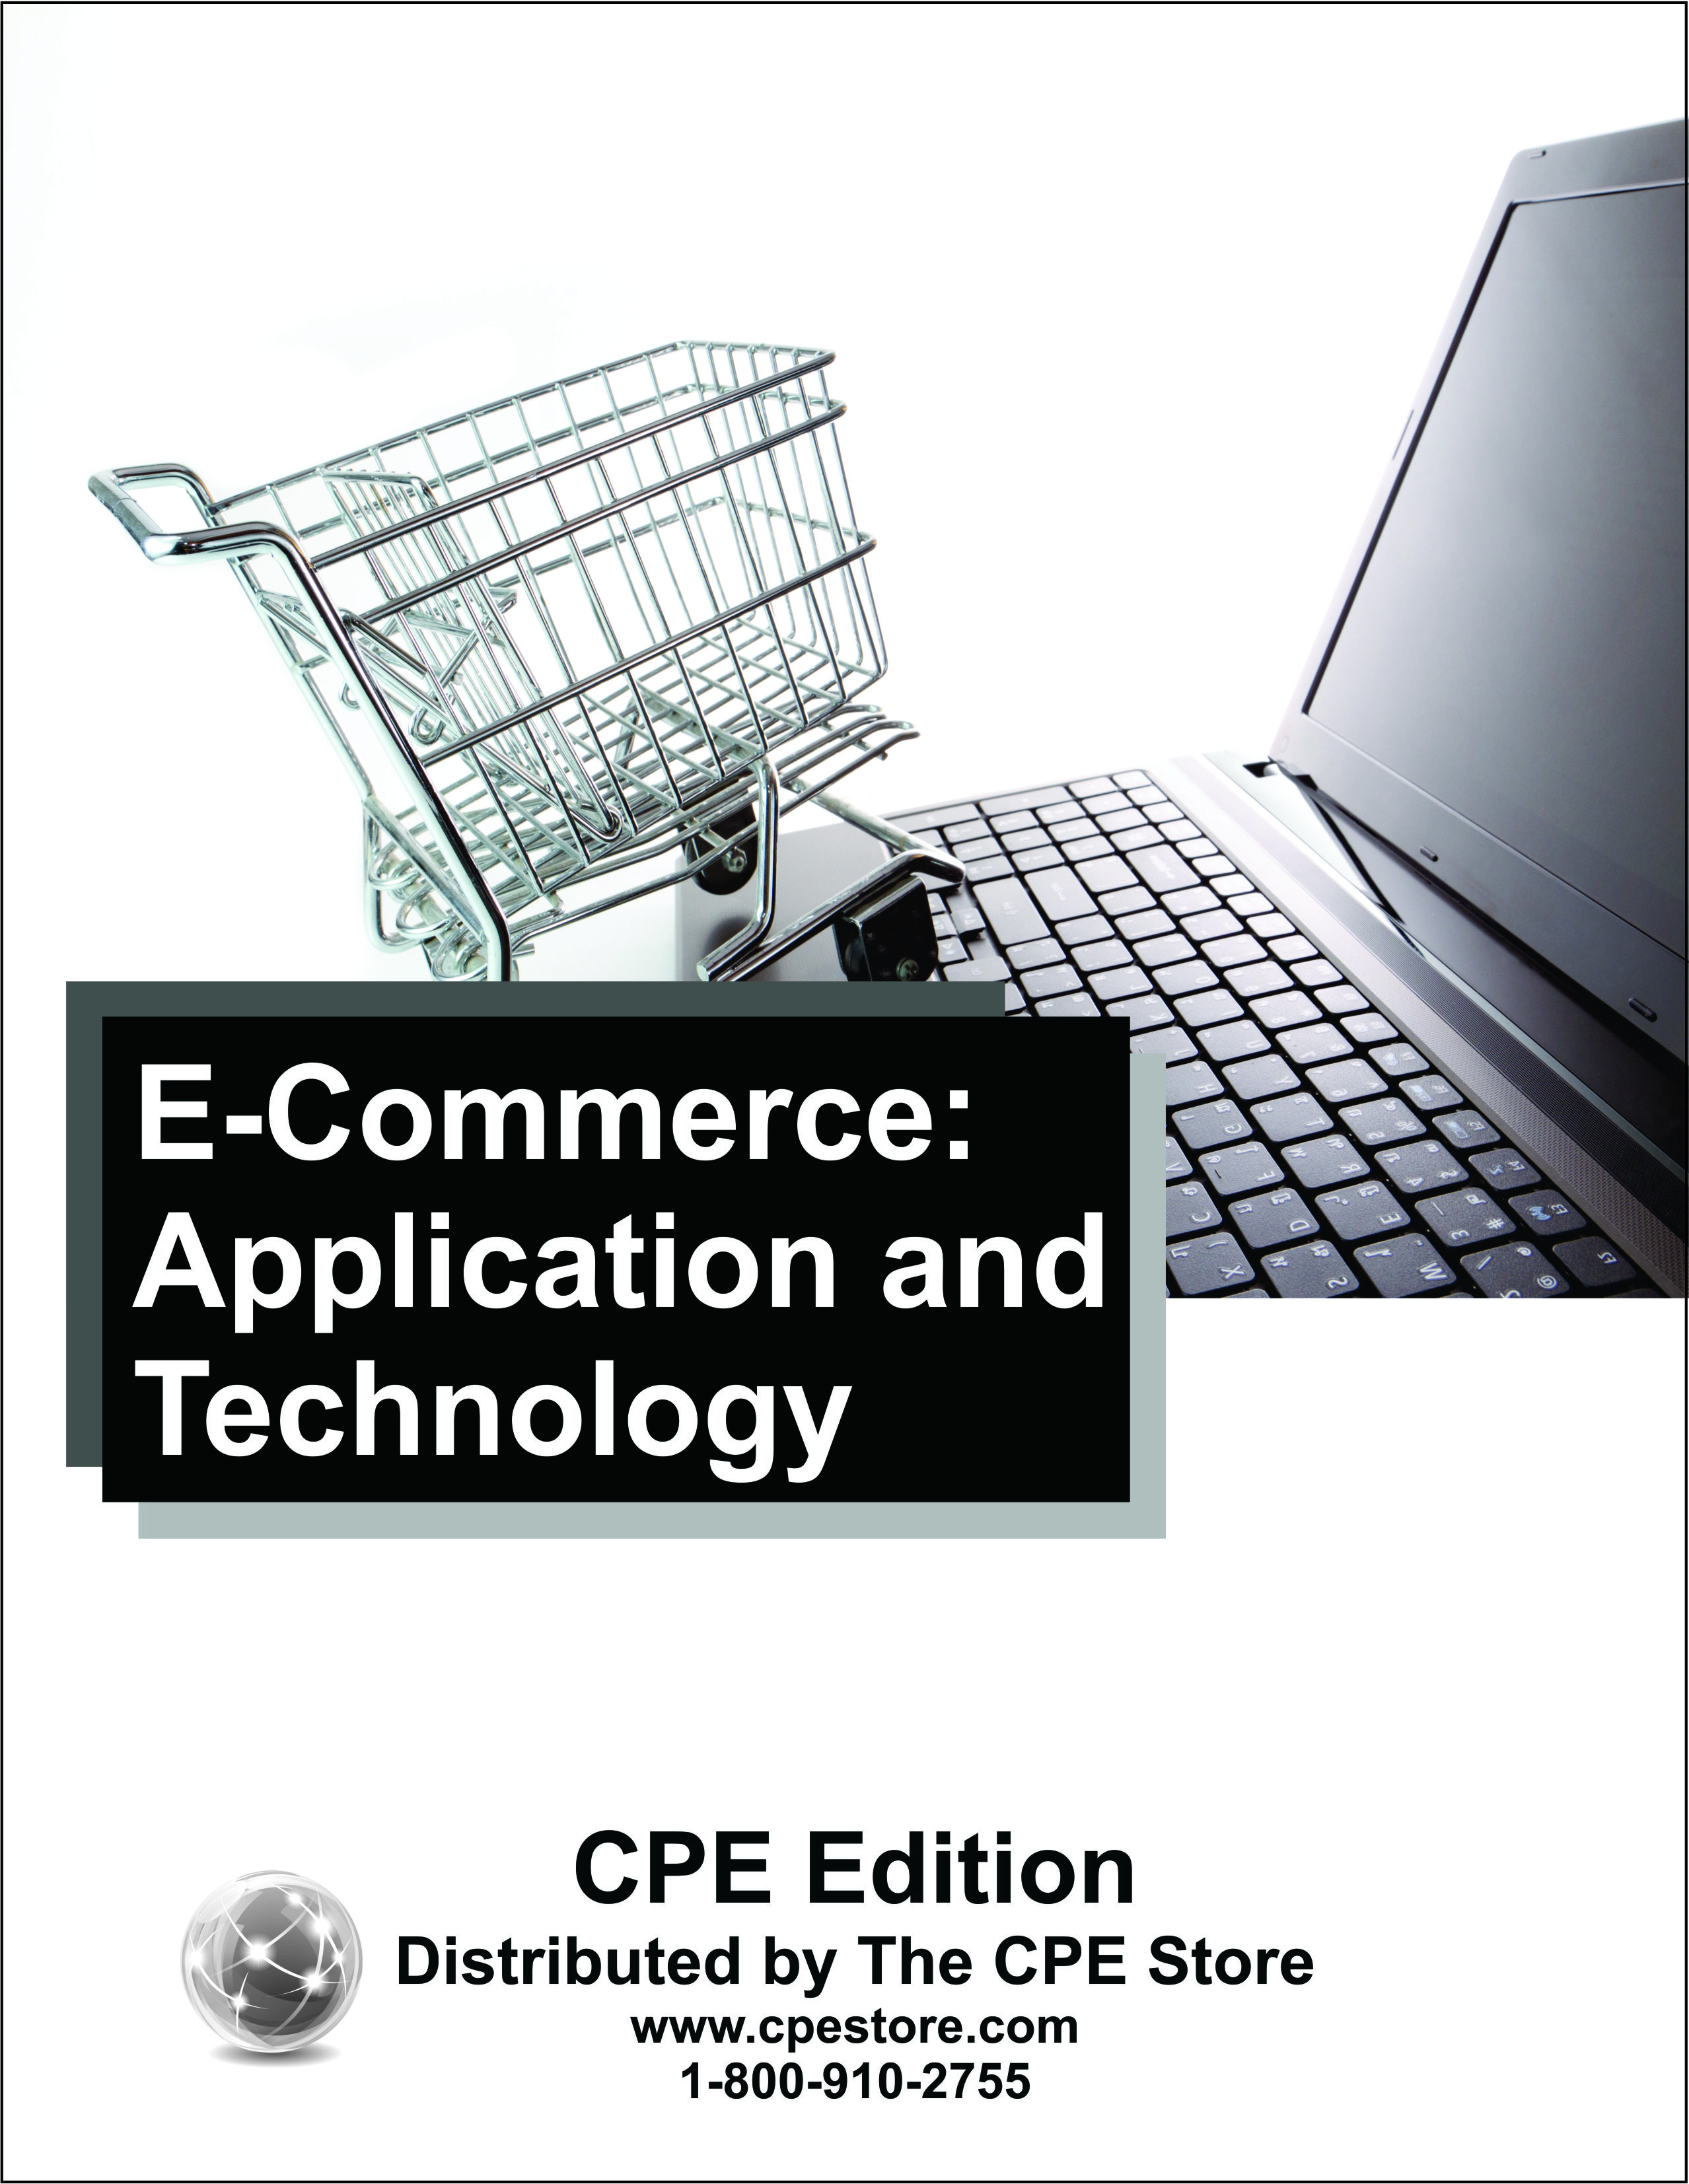 E-Commerce: Application and Technology